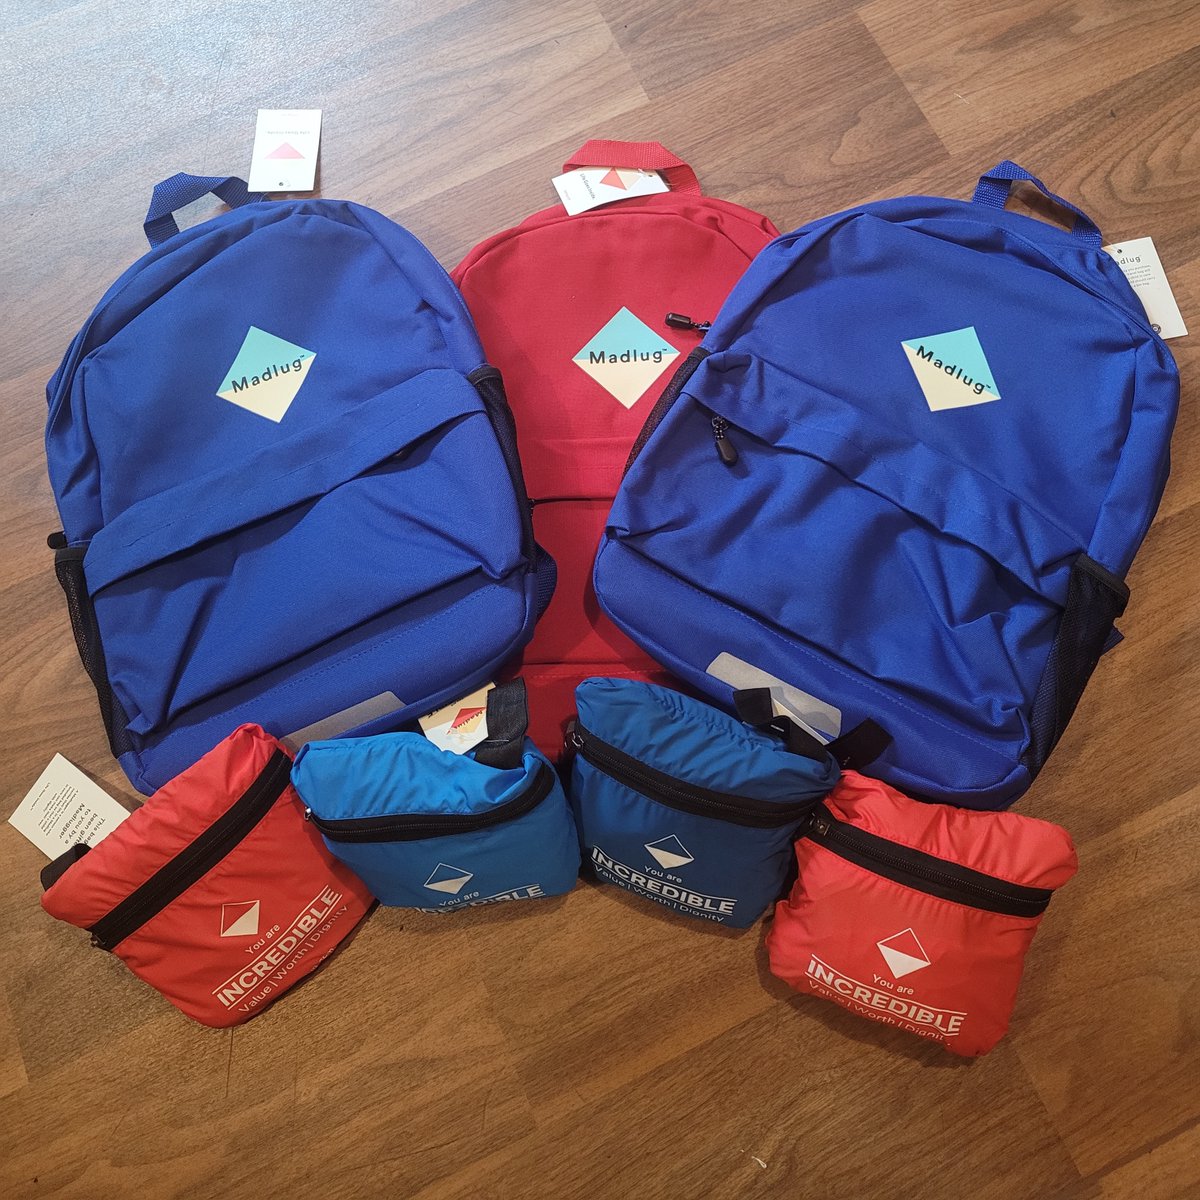 🎒We are thankful for a recent donation of  @wearemadlug bags for young people at one of our London Homes. Their ethos is to ensure “no child in care should carry their life in a bin bag” to guard against “reinforcing a sense of worthlessness.” We agree! #ValueWorthDignity 😀